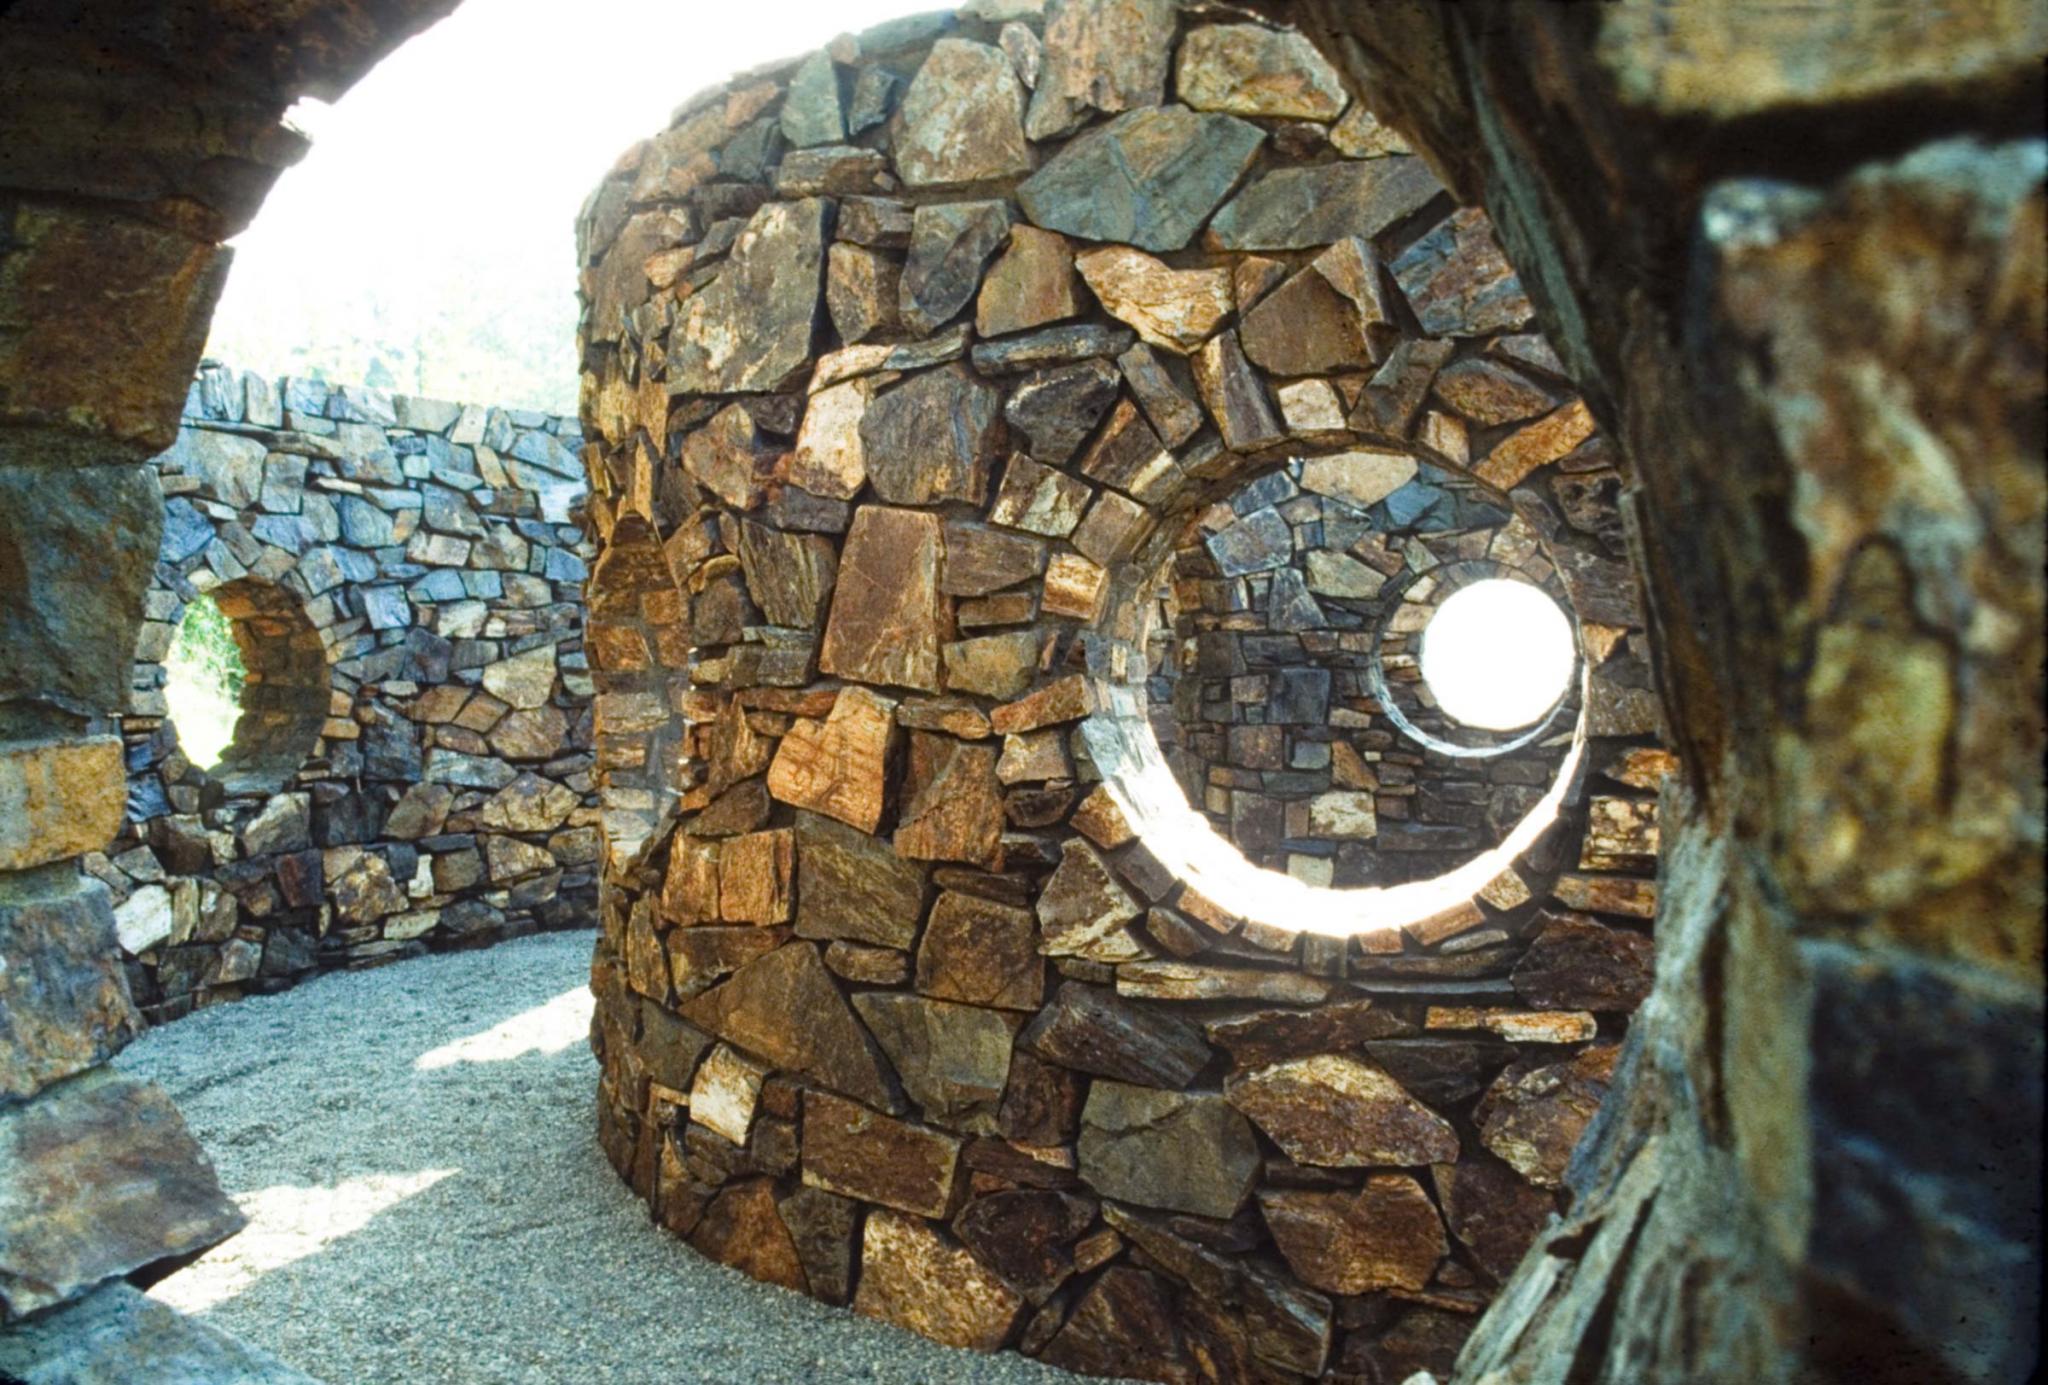 Looking through a circular opening at another curved stone wall with another circular opening in it.